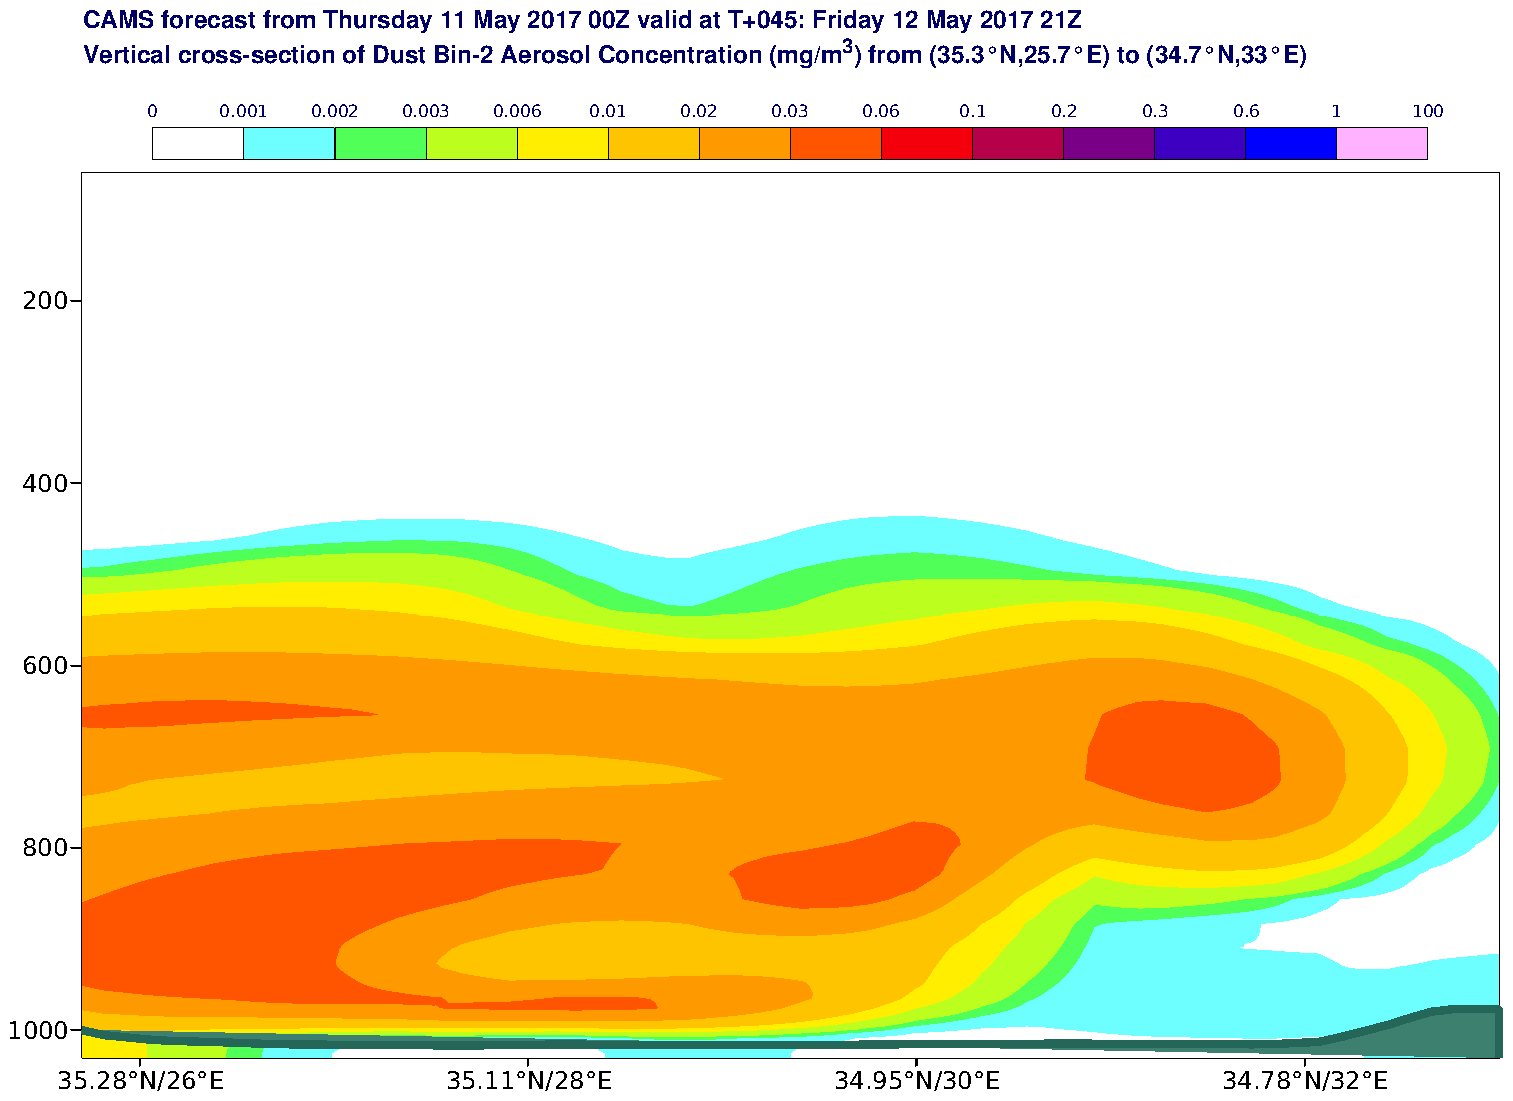 Vertical cross-section of Dust Bin-2 Aerosol Concentration (mg/m3) valid at T45 - 2017-05-12 21:00